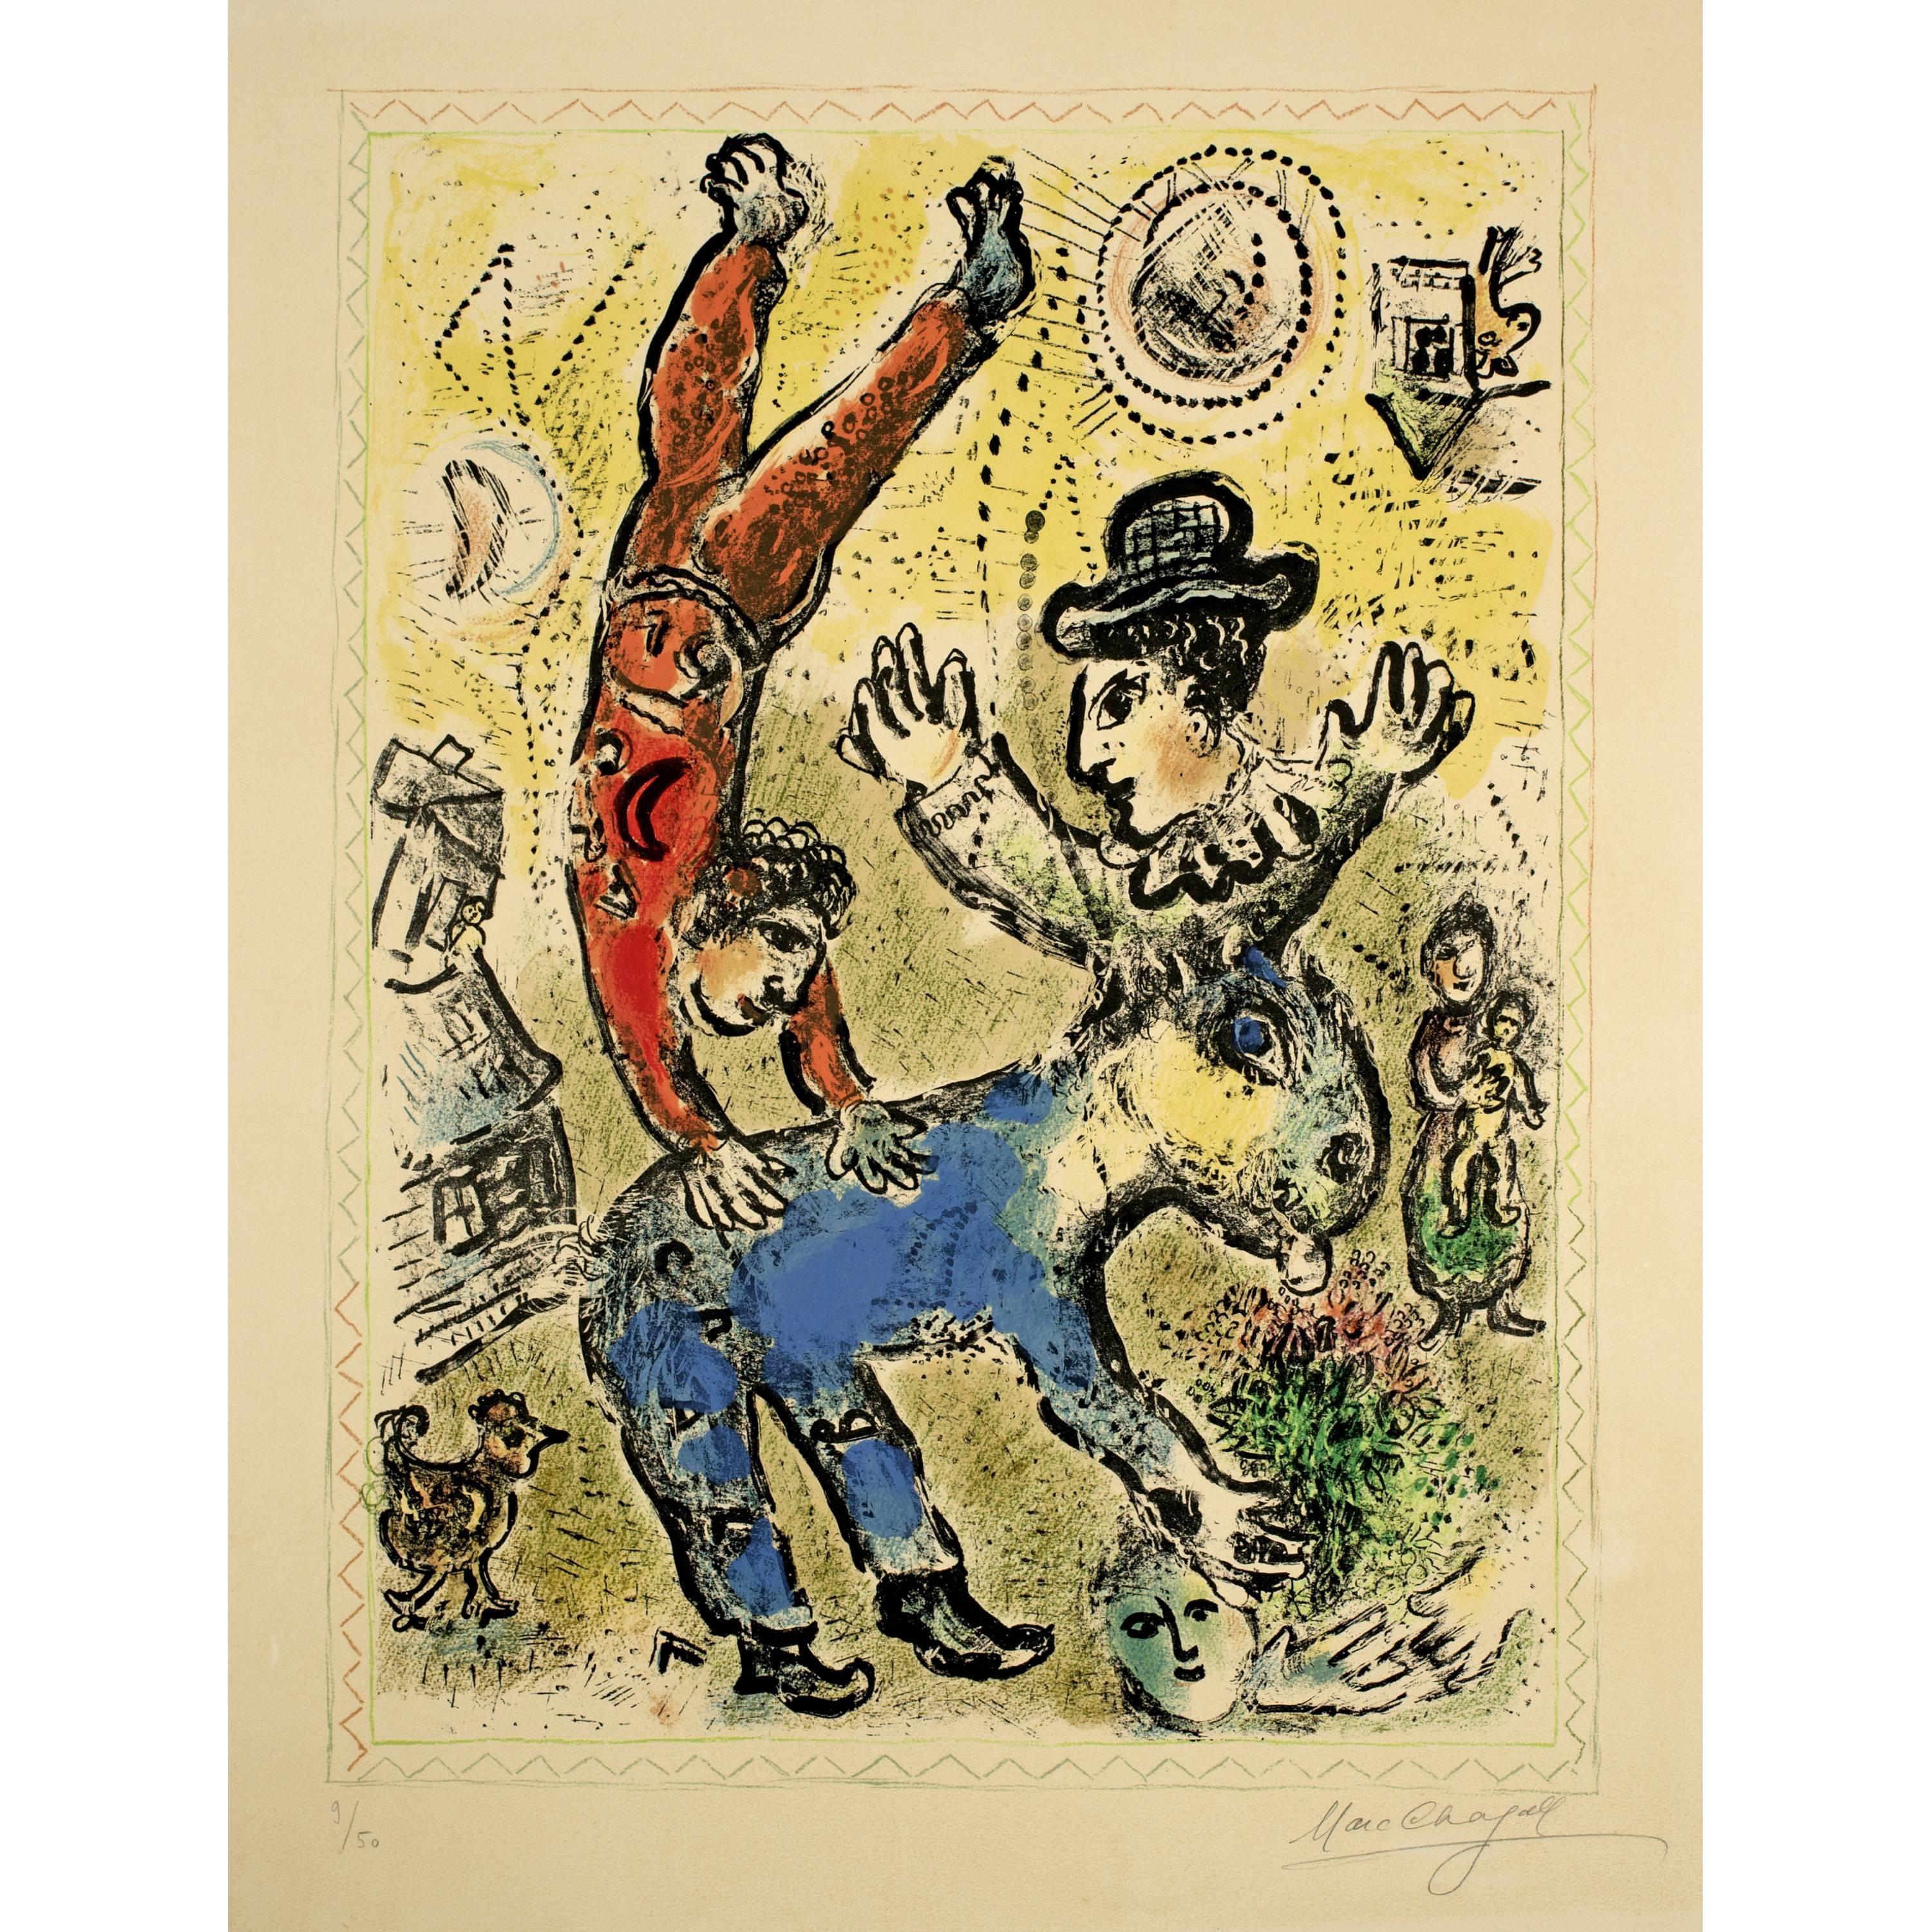  MARC CHAGALL  L'acrobate rouge - Print by Marc Chagall